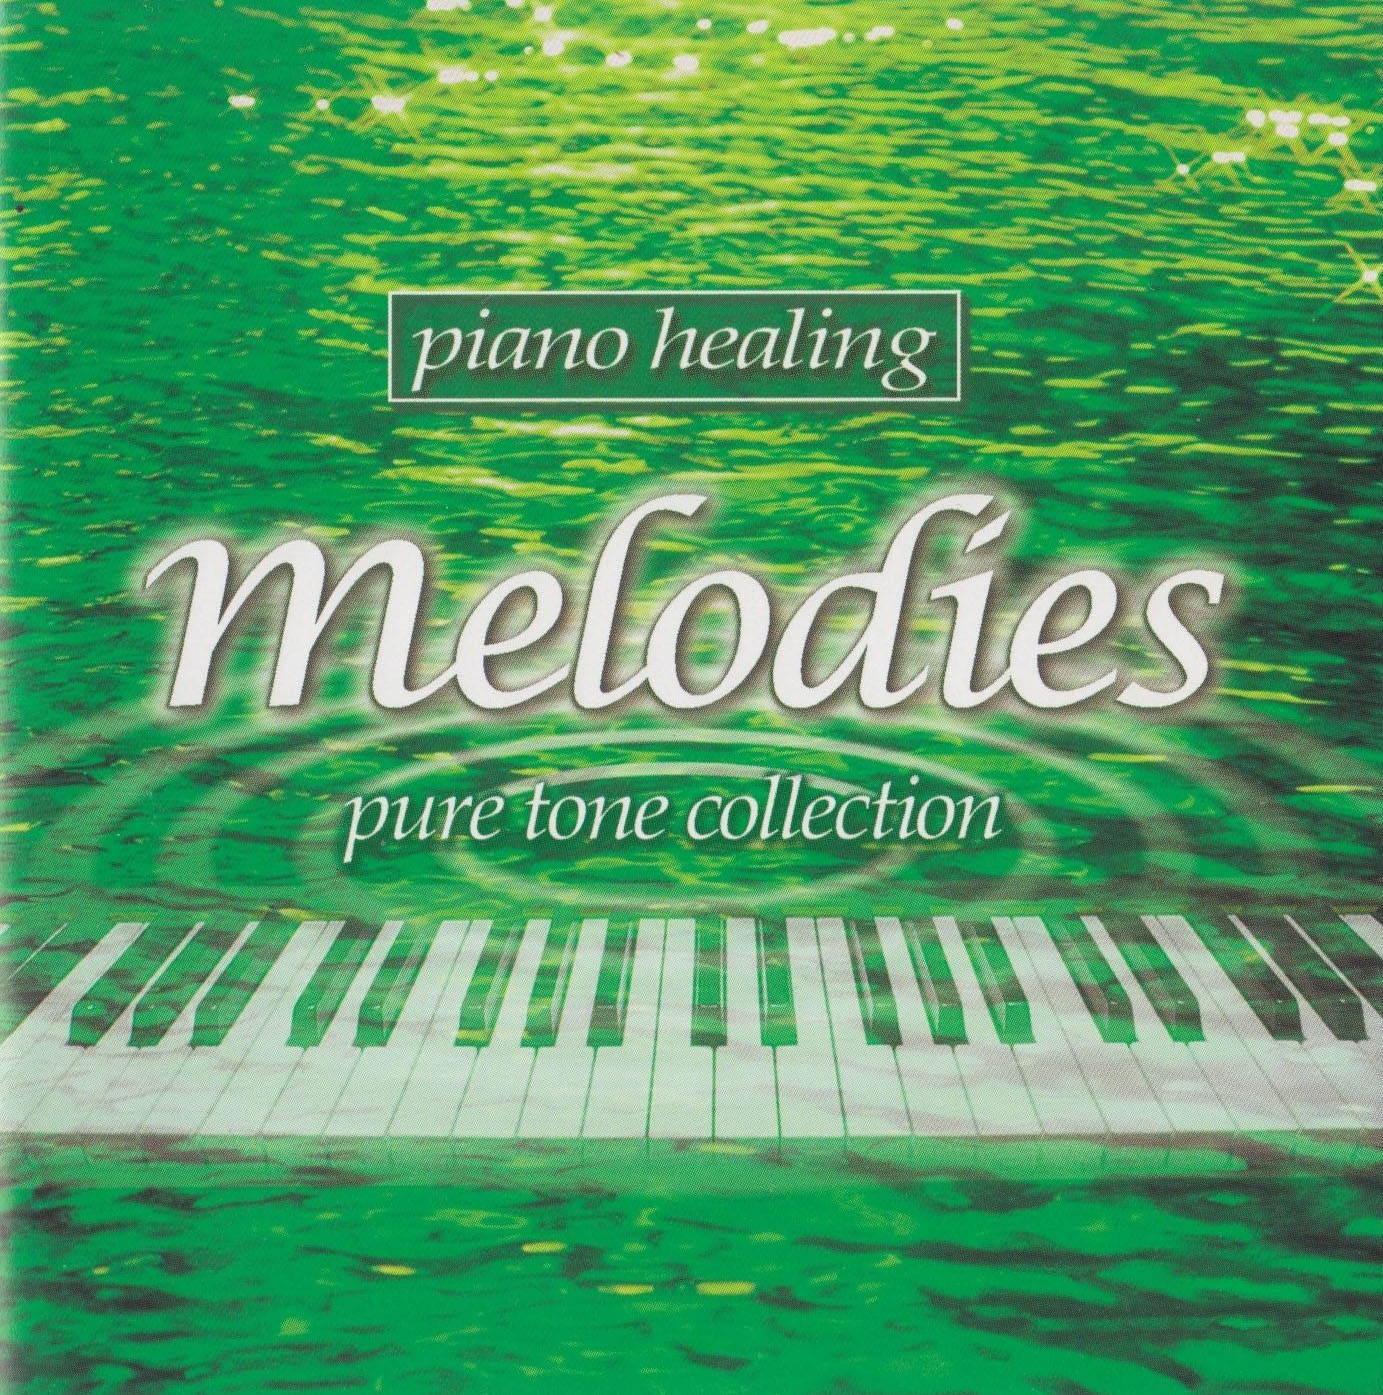 Tone collection. Music collection 2001. Naive Melody talking heads. Va - Melody Hits World Instrumental - best Melodies [2008].